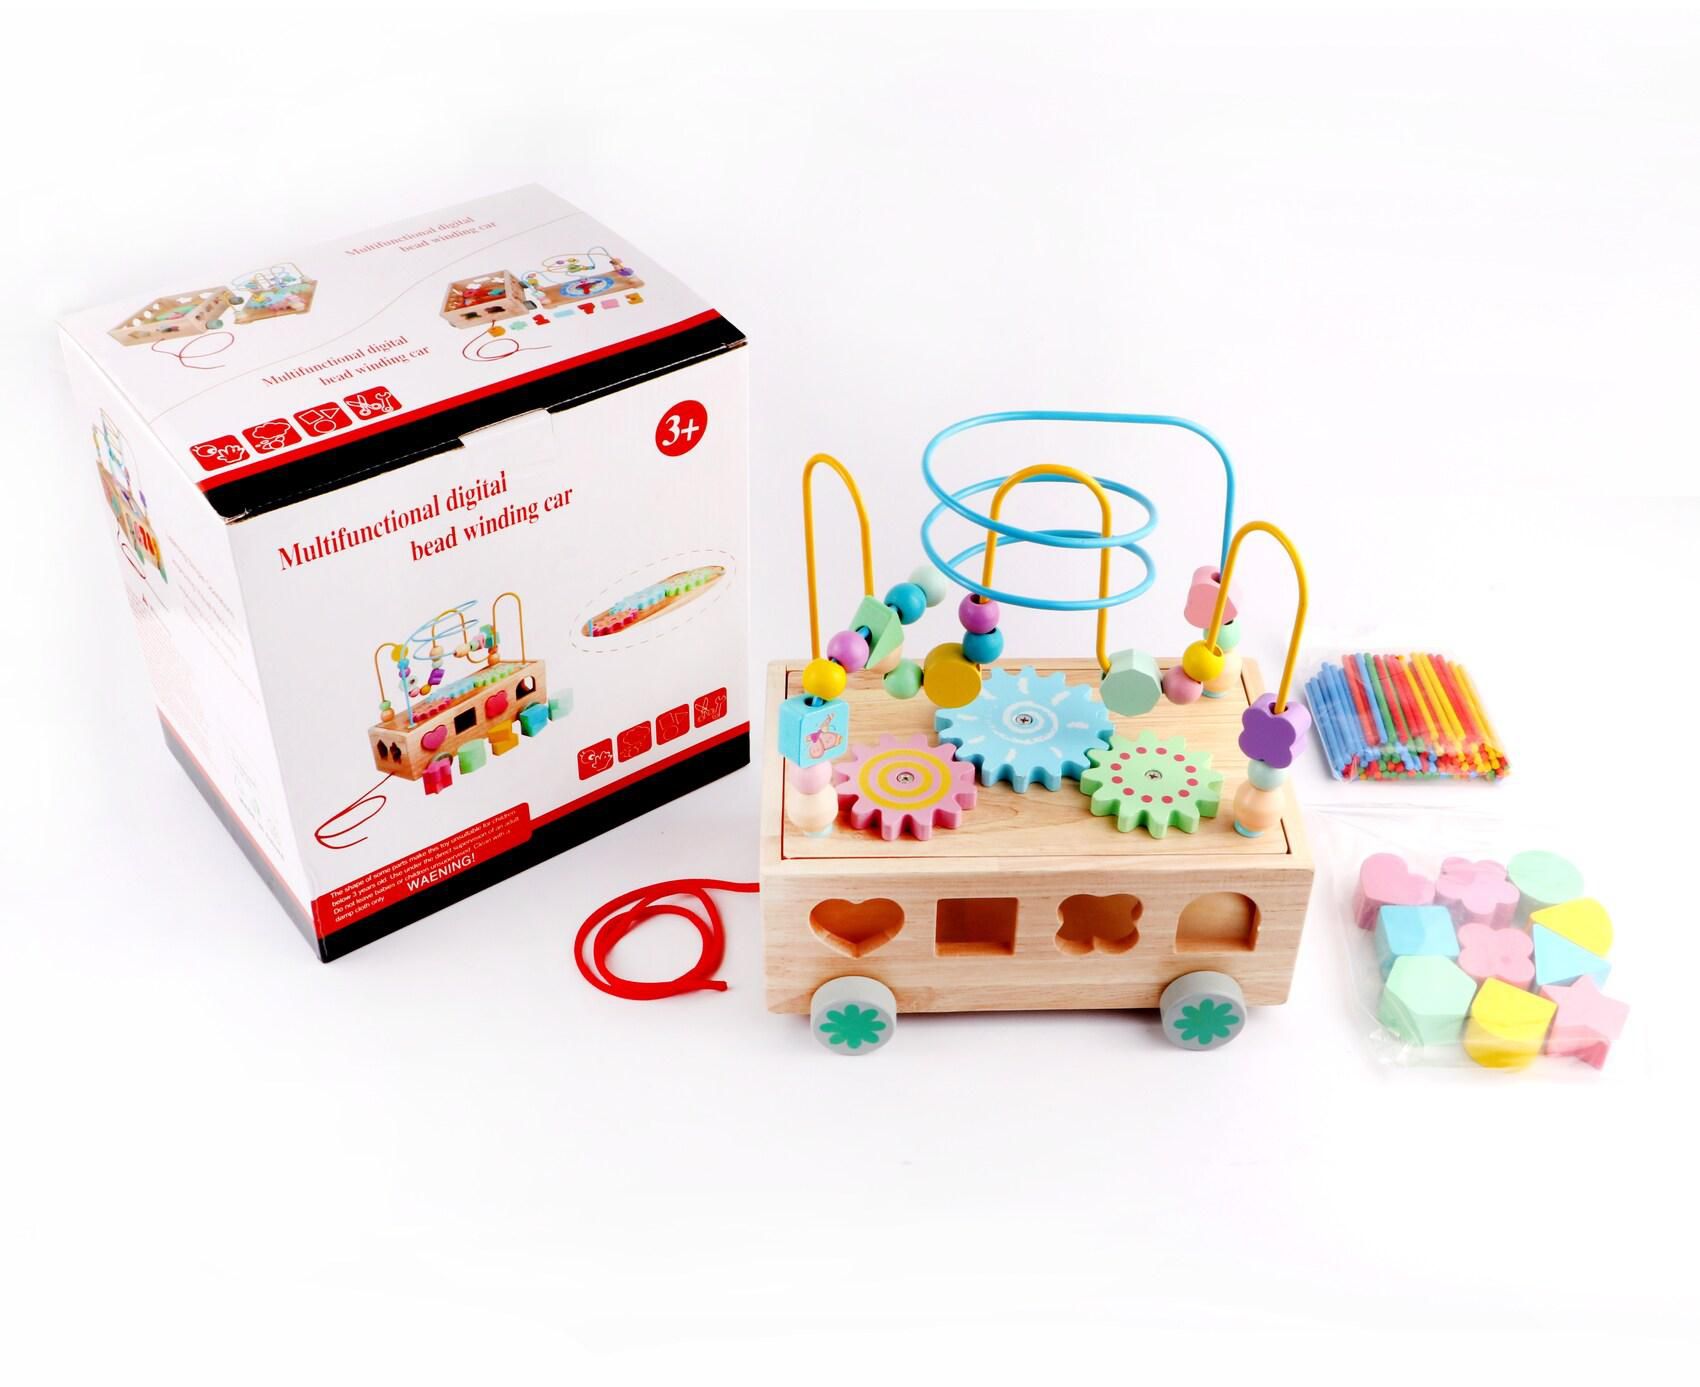 Factory Price, Multifunctional 4 In 1 Wooden Activity Cube With A Bead Winding Pull Along Car, Number Design